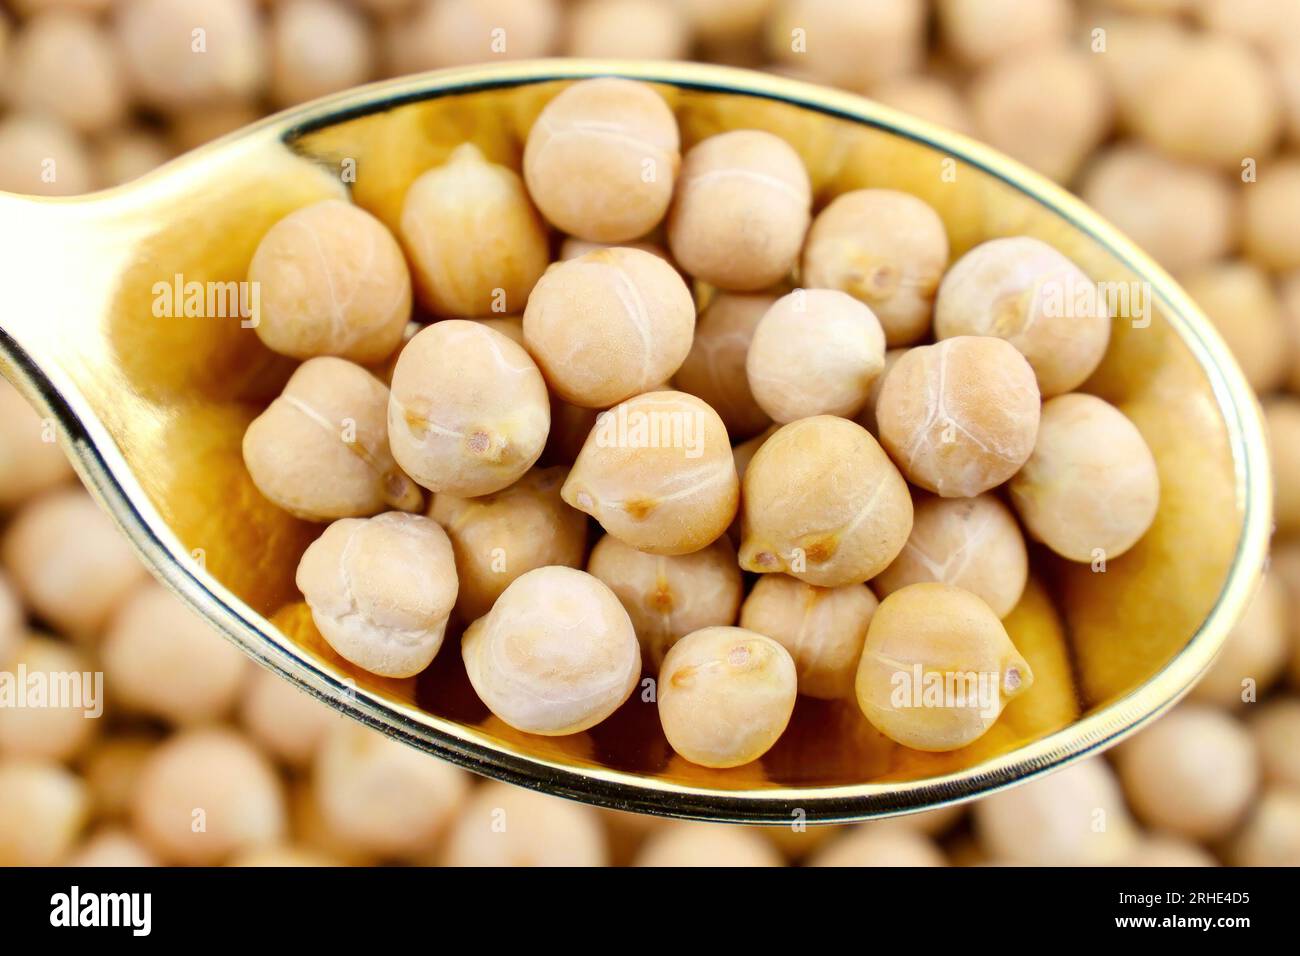 Yellow dried chickpeas or chick peas in spoon close up. Stock Photo